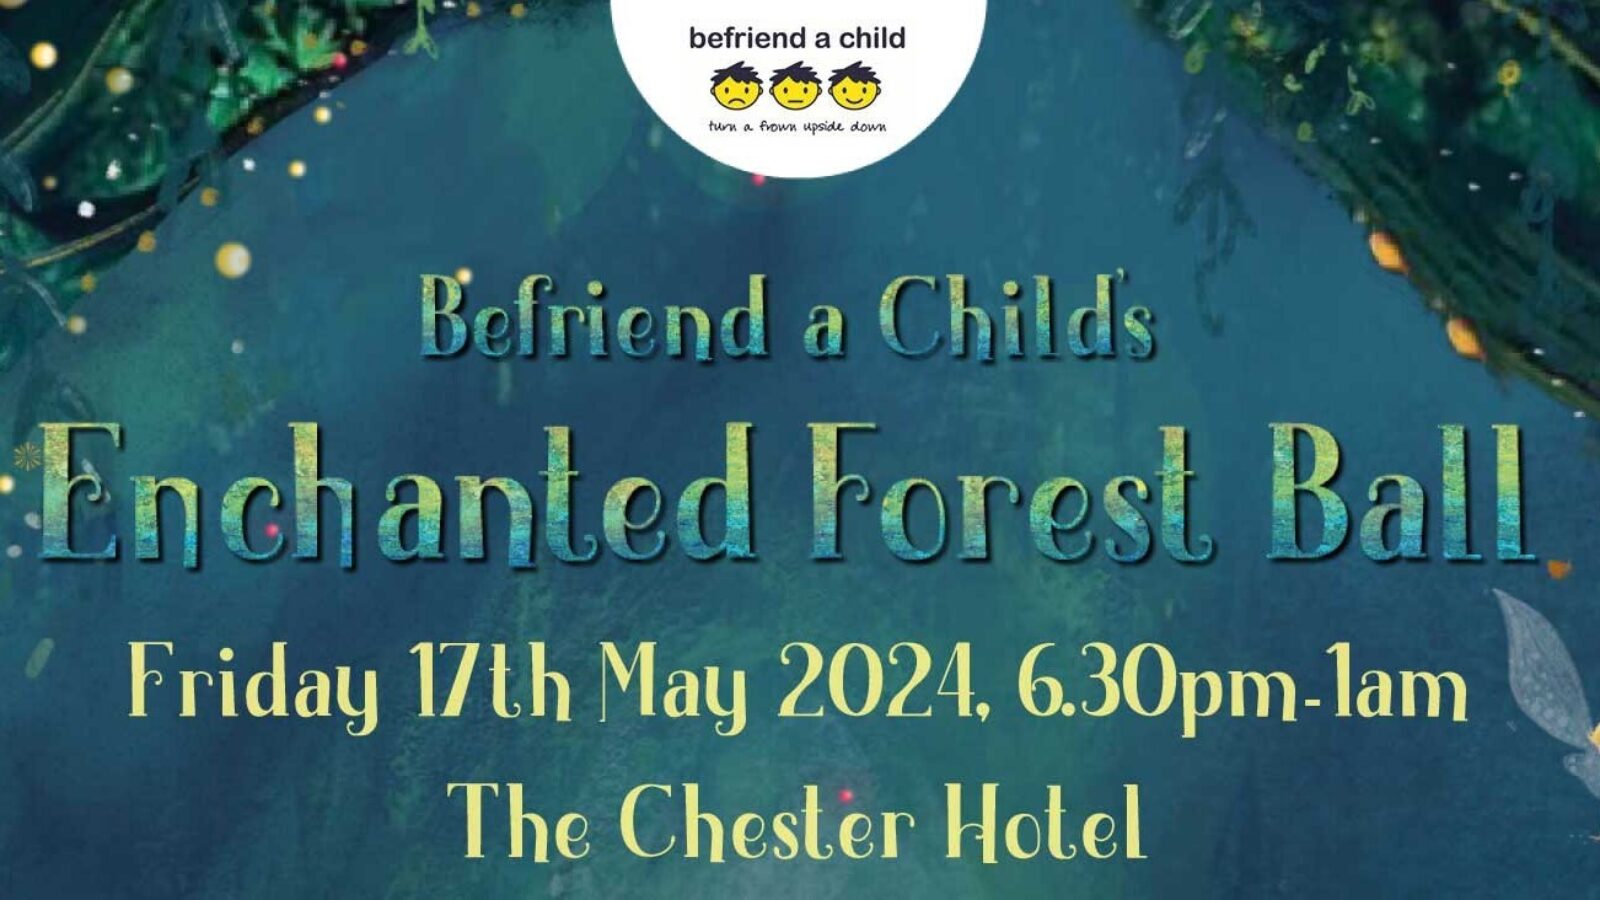 Step into a magical land of storytelling at Befriend a Child’s Enchanted Forest Ball